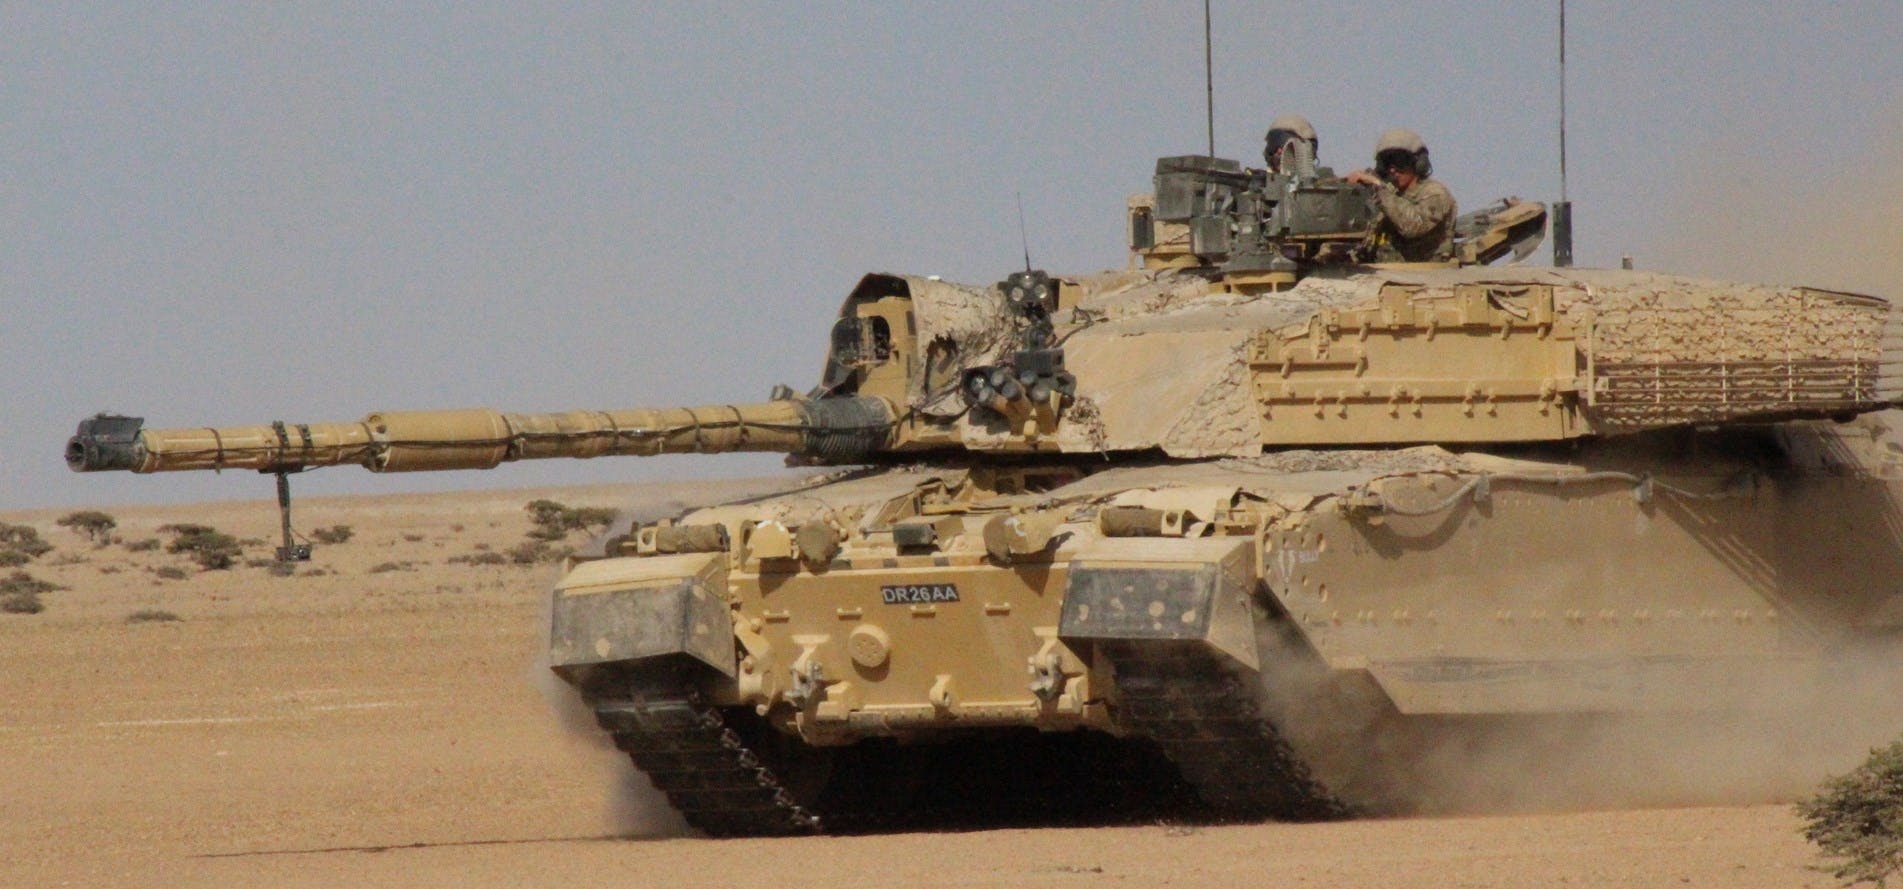 Challenger 2 tanks and Wildcat helicopters prove desert capability